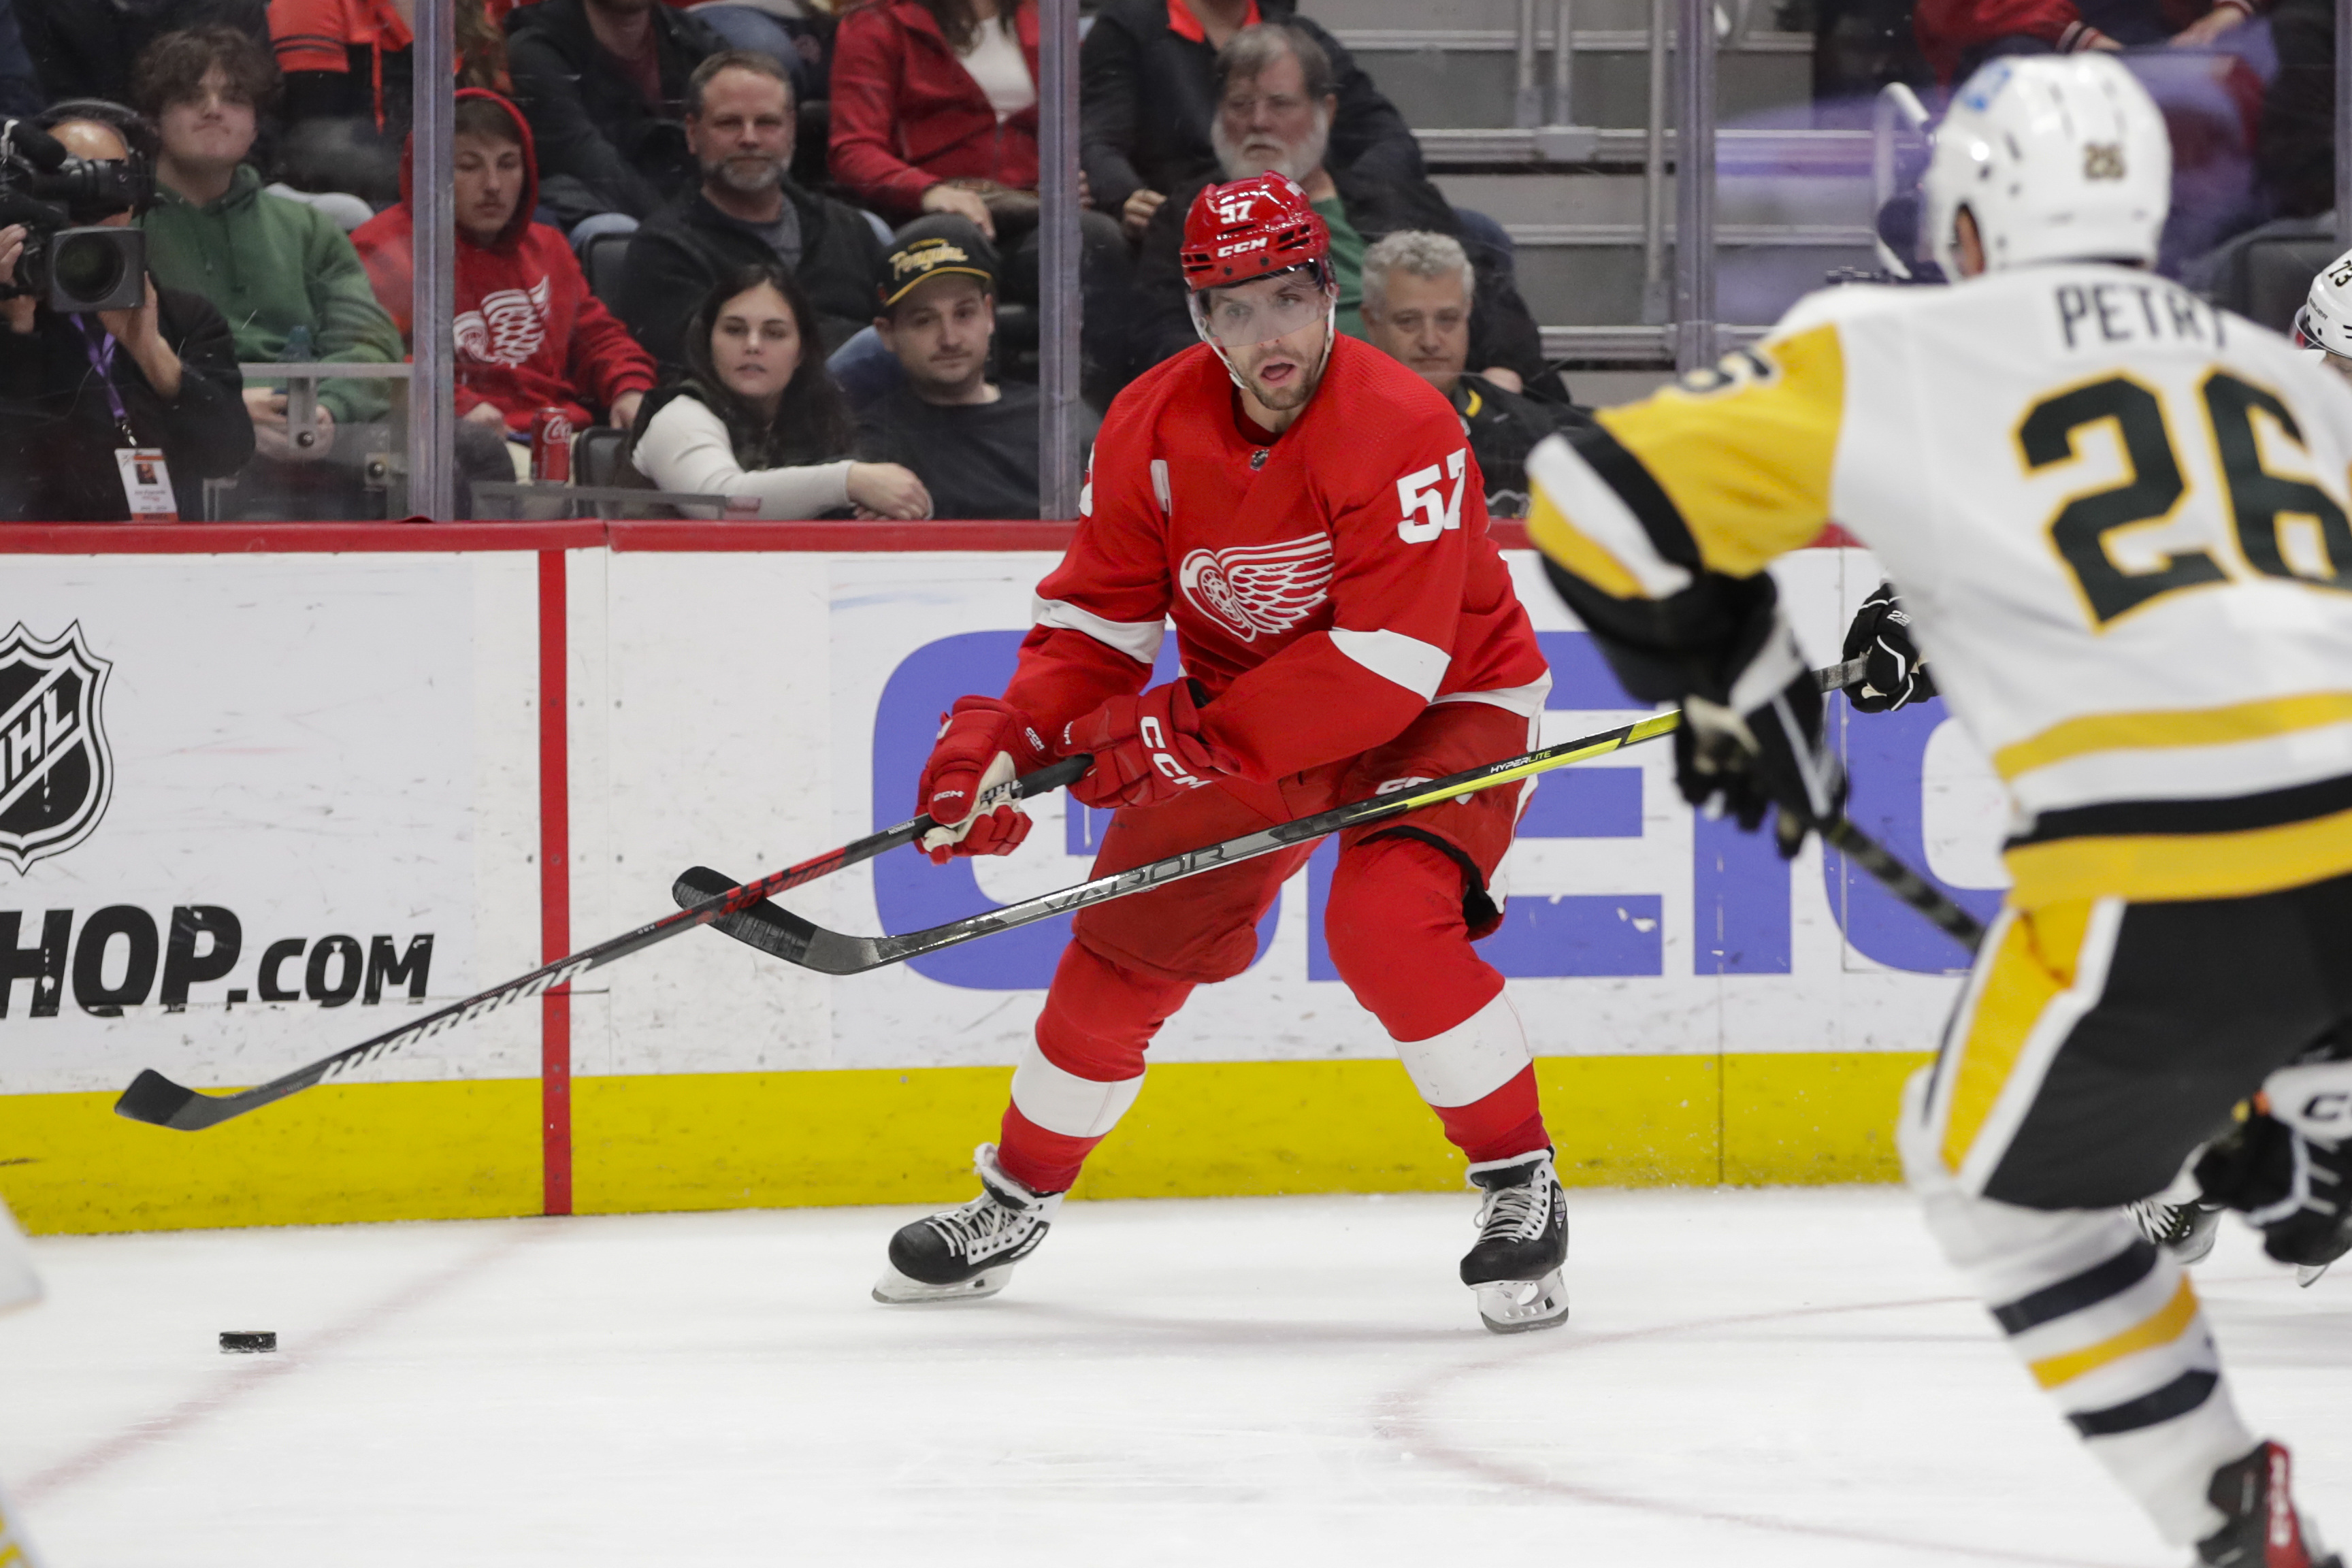 NHL: Pittsburgh Penguins at Detroit Red Wings